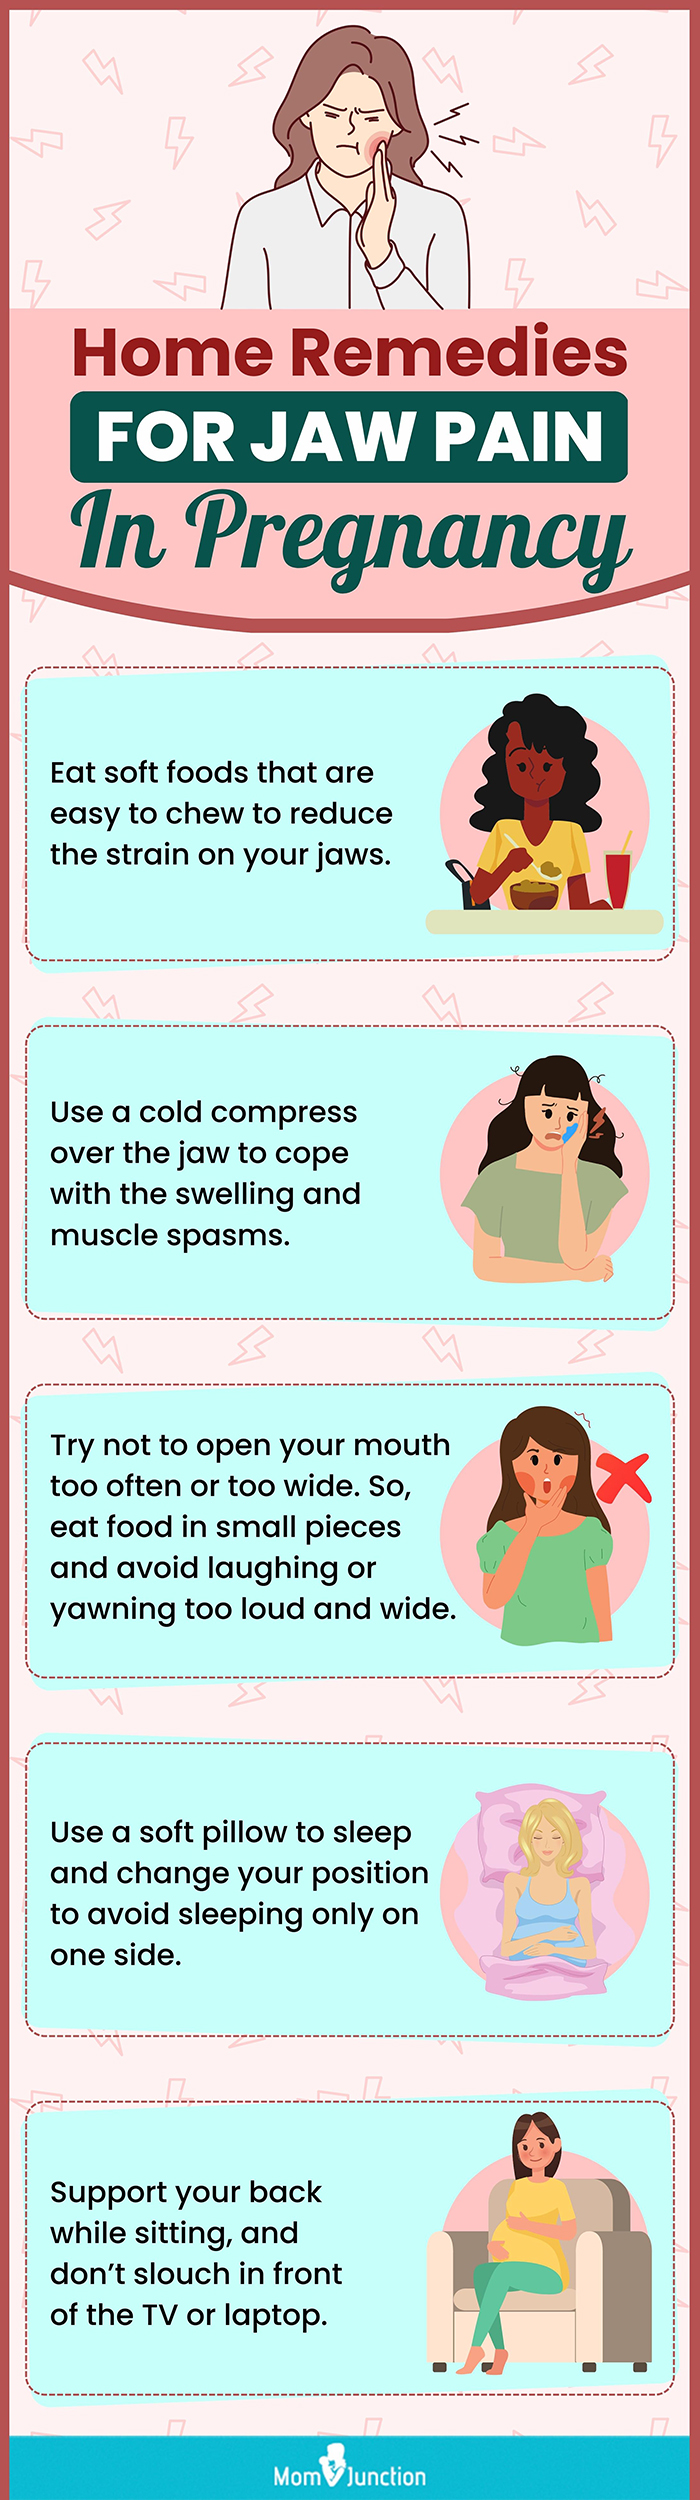 home remedies for jaw pain in pregnancy (infographic)